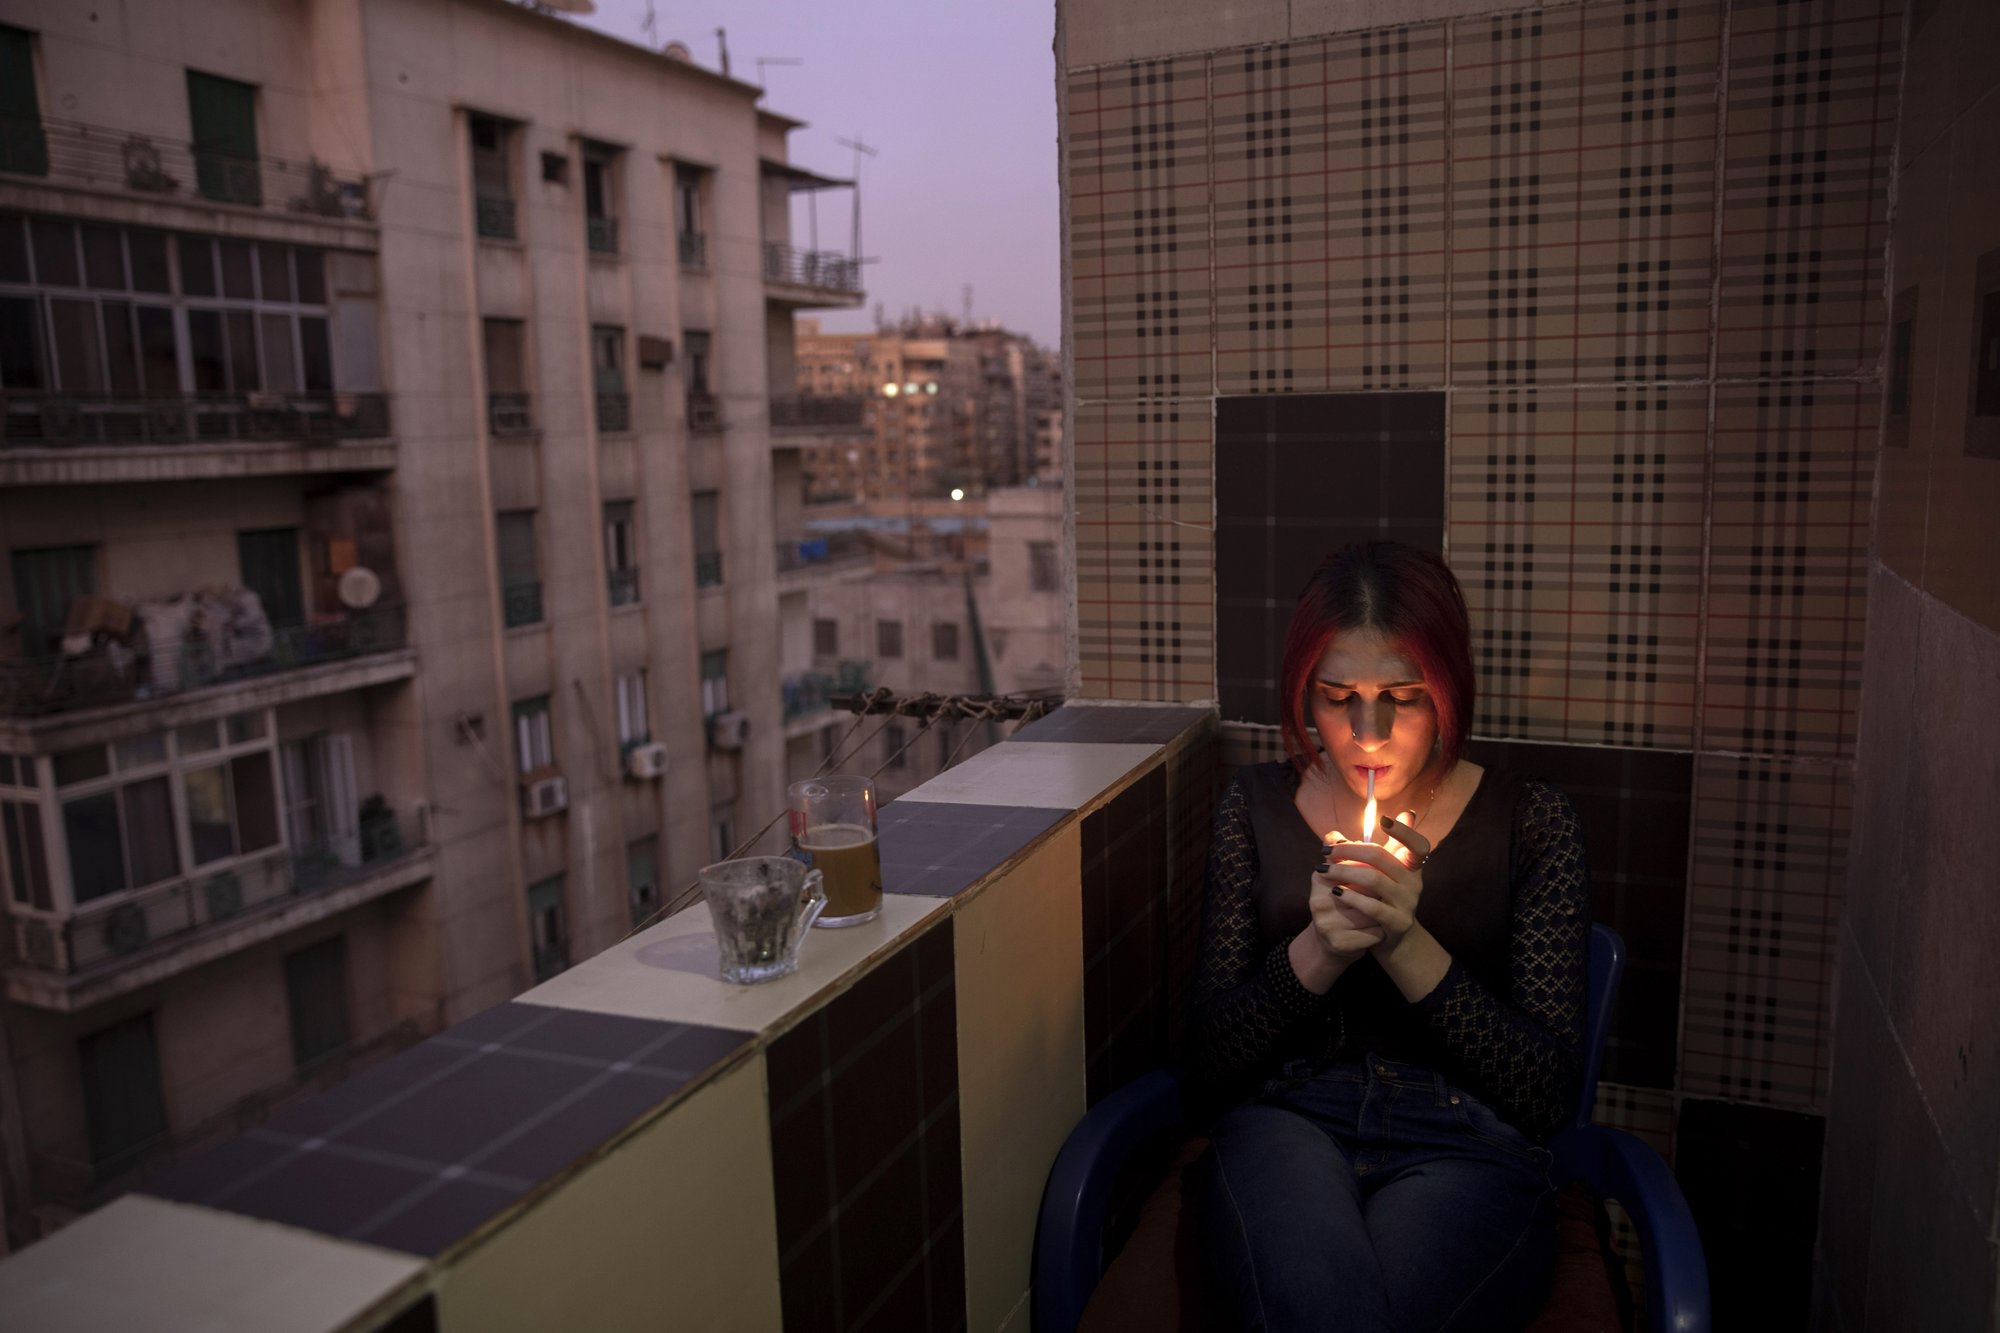 Malak el-Kashif smokes a cigarette in the balcony of her apartment in Cairo, Egypt. (AP Photo/Nariman El-Mofty